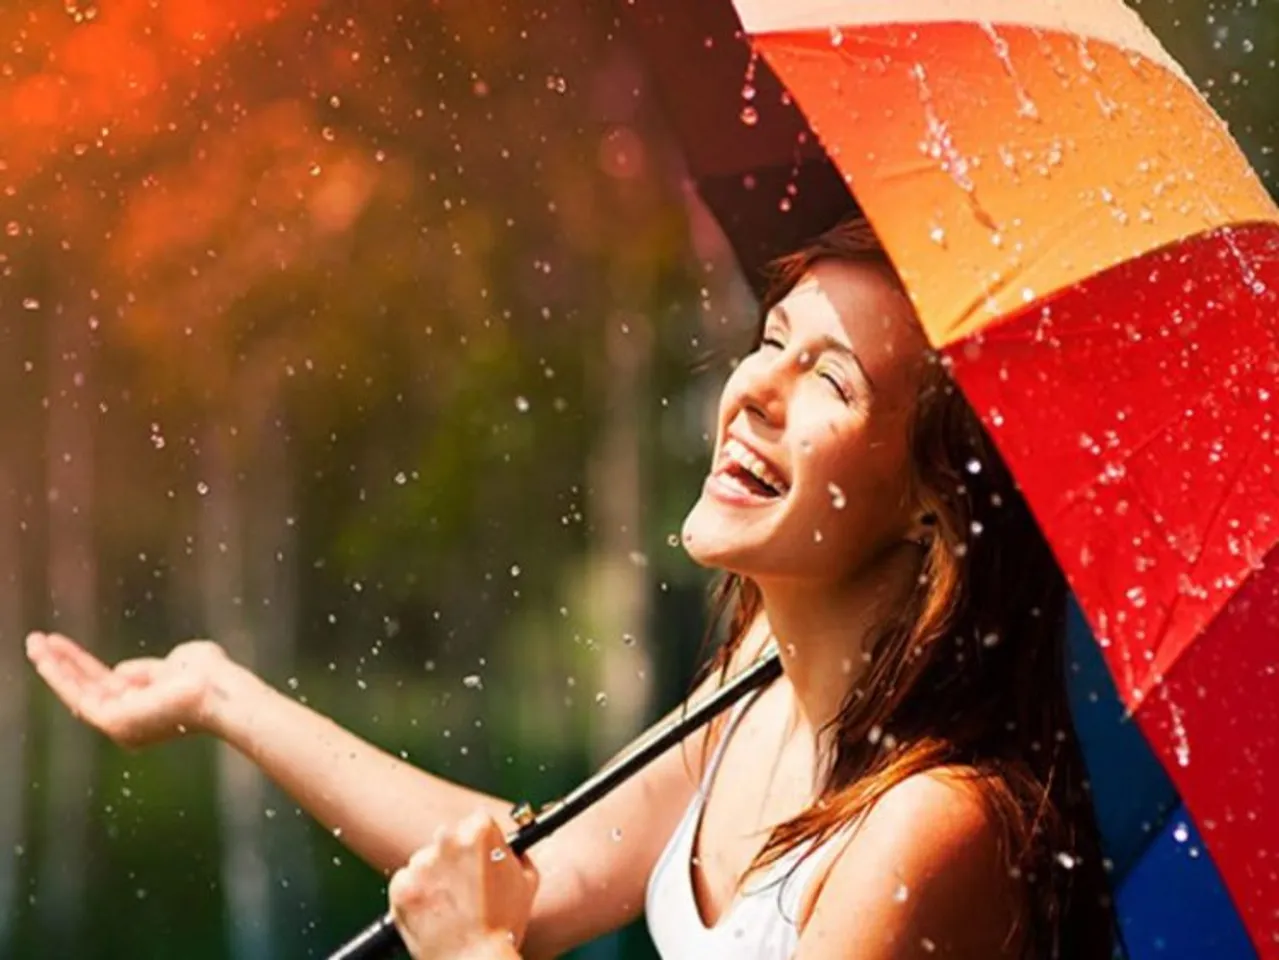 How to take care of your hair and skin during the rainy season?